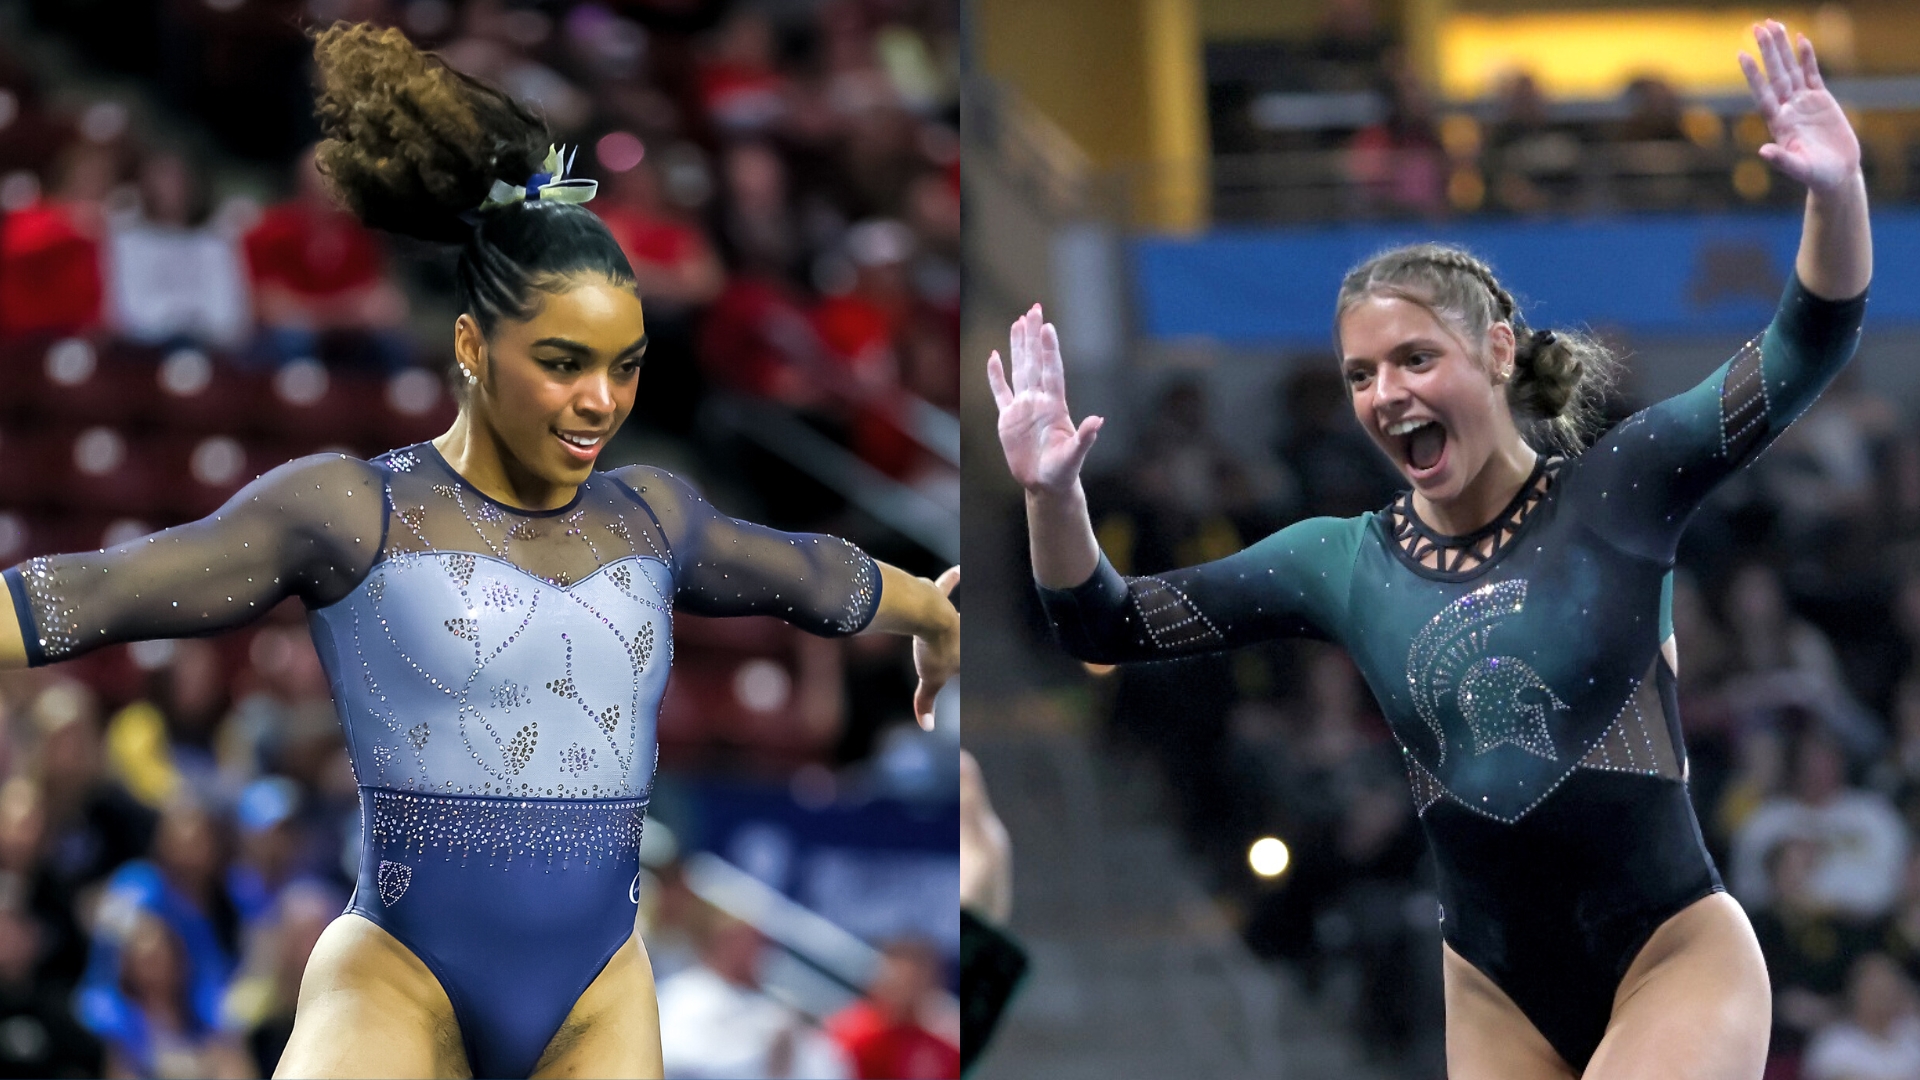 The story behind the leo Michigan State gymnastics is all about the